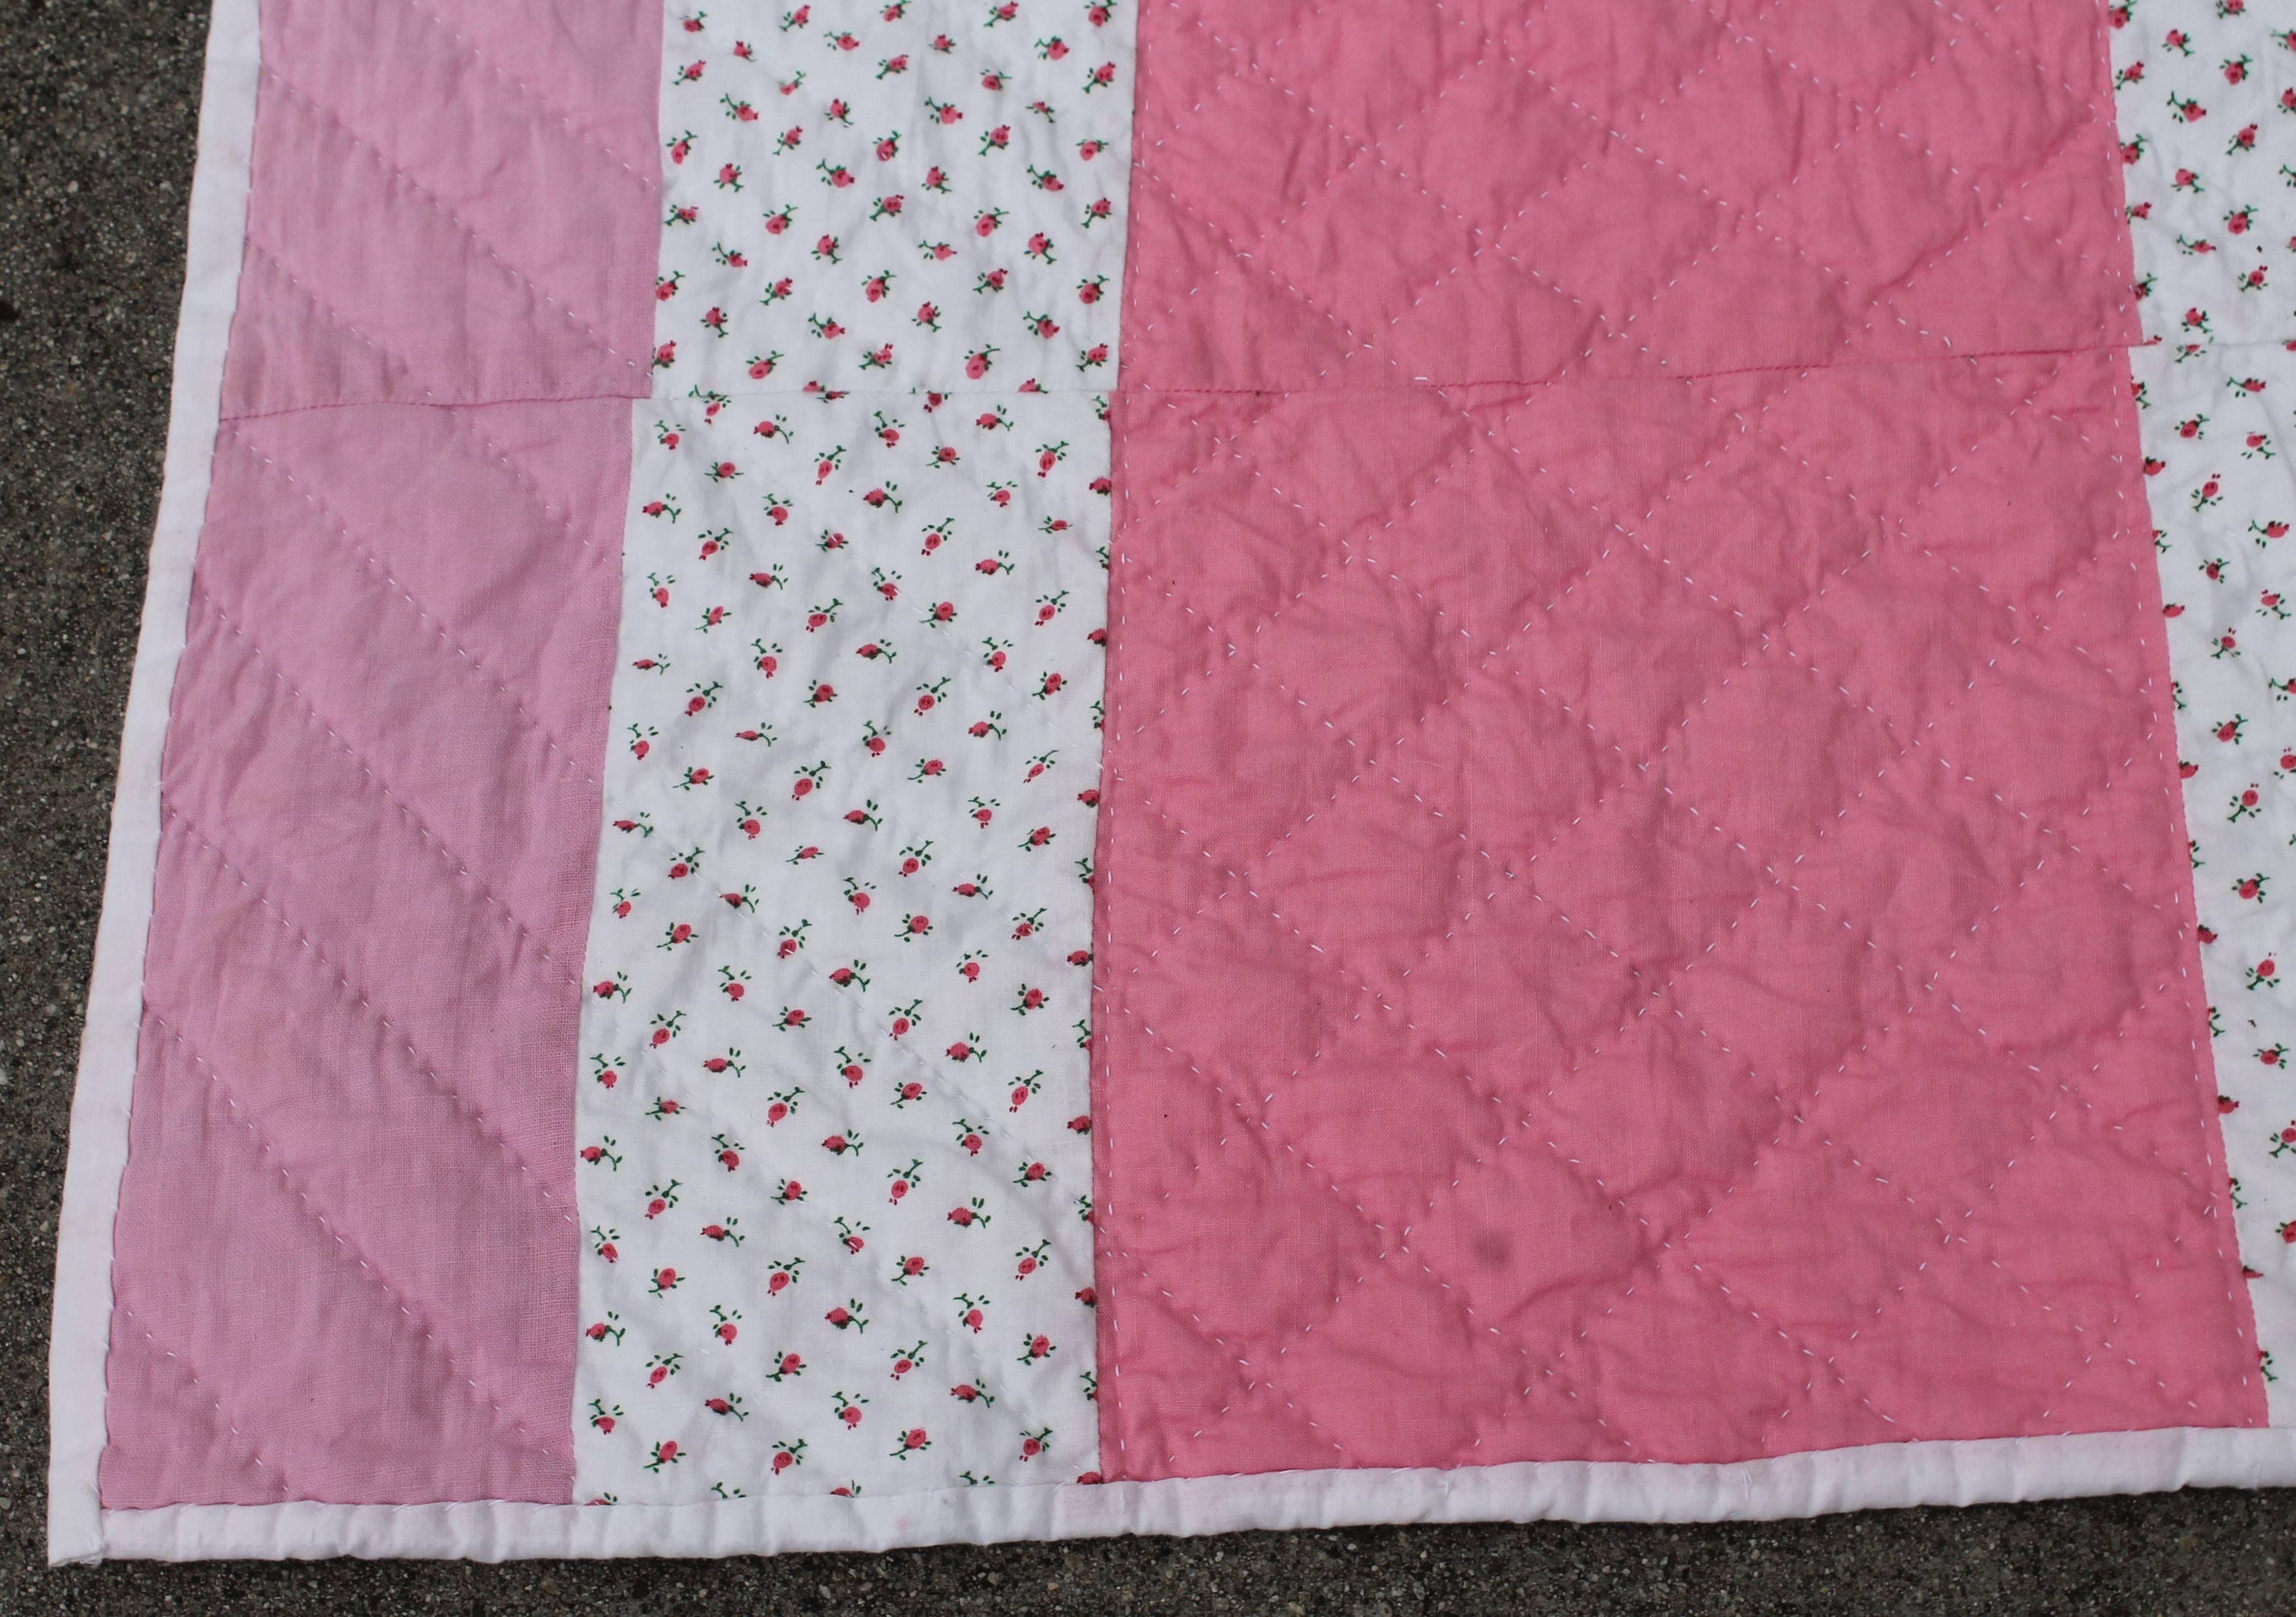 This crisp mauve and pink large flying geese quilt is in very good condition and wonderful quilting. This is a large size quilt for a king or queen bed. The quilting and piece work is the best of quality. The white ground has little calico roses in